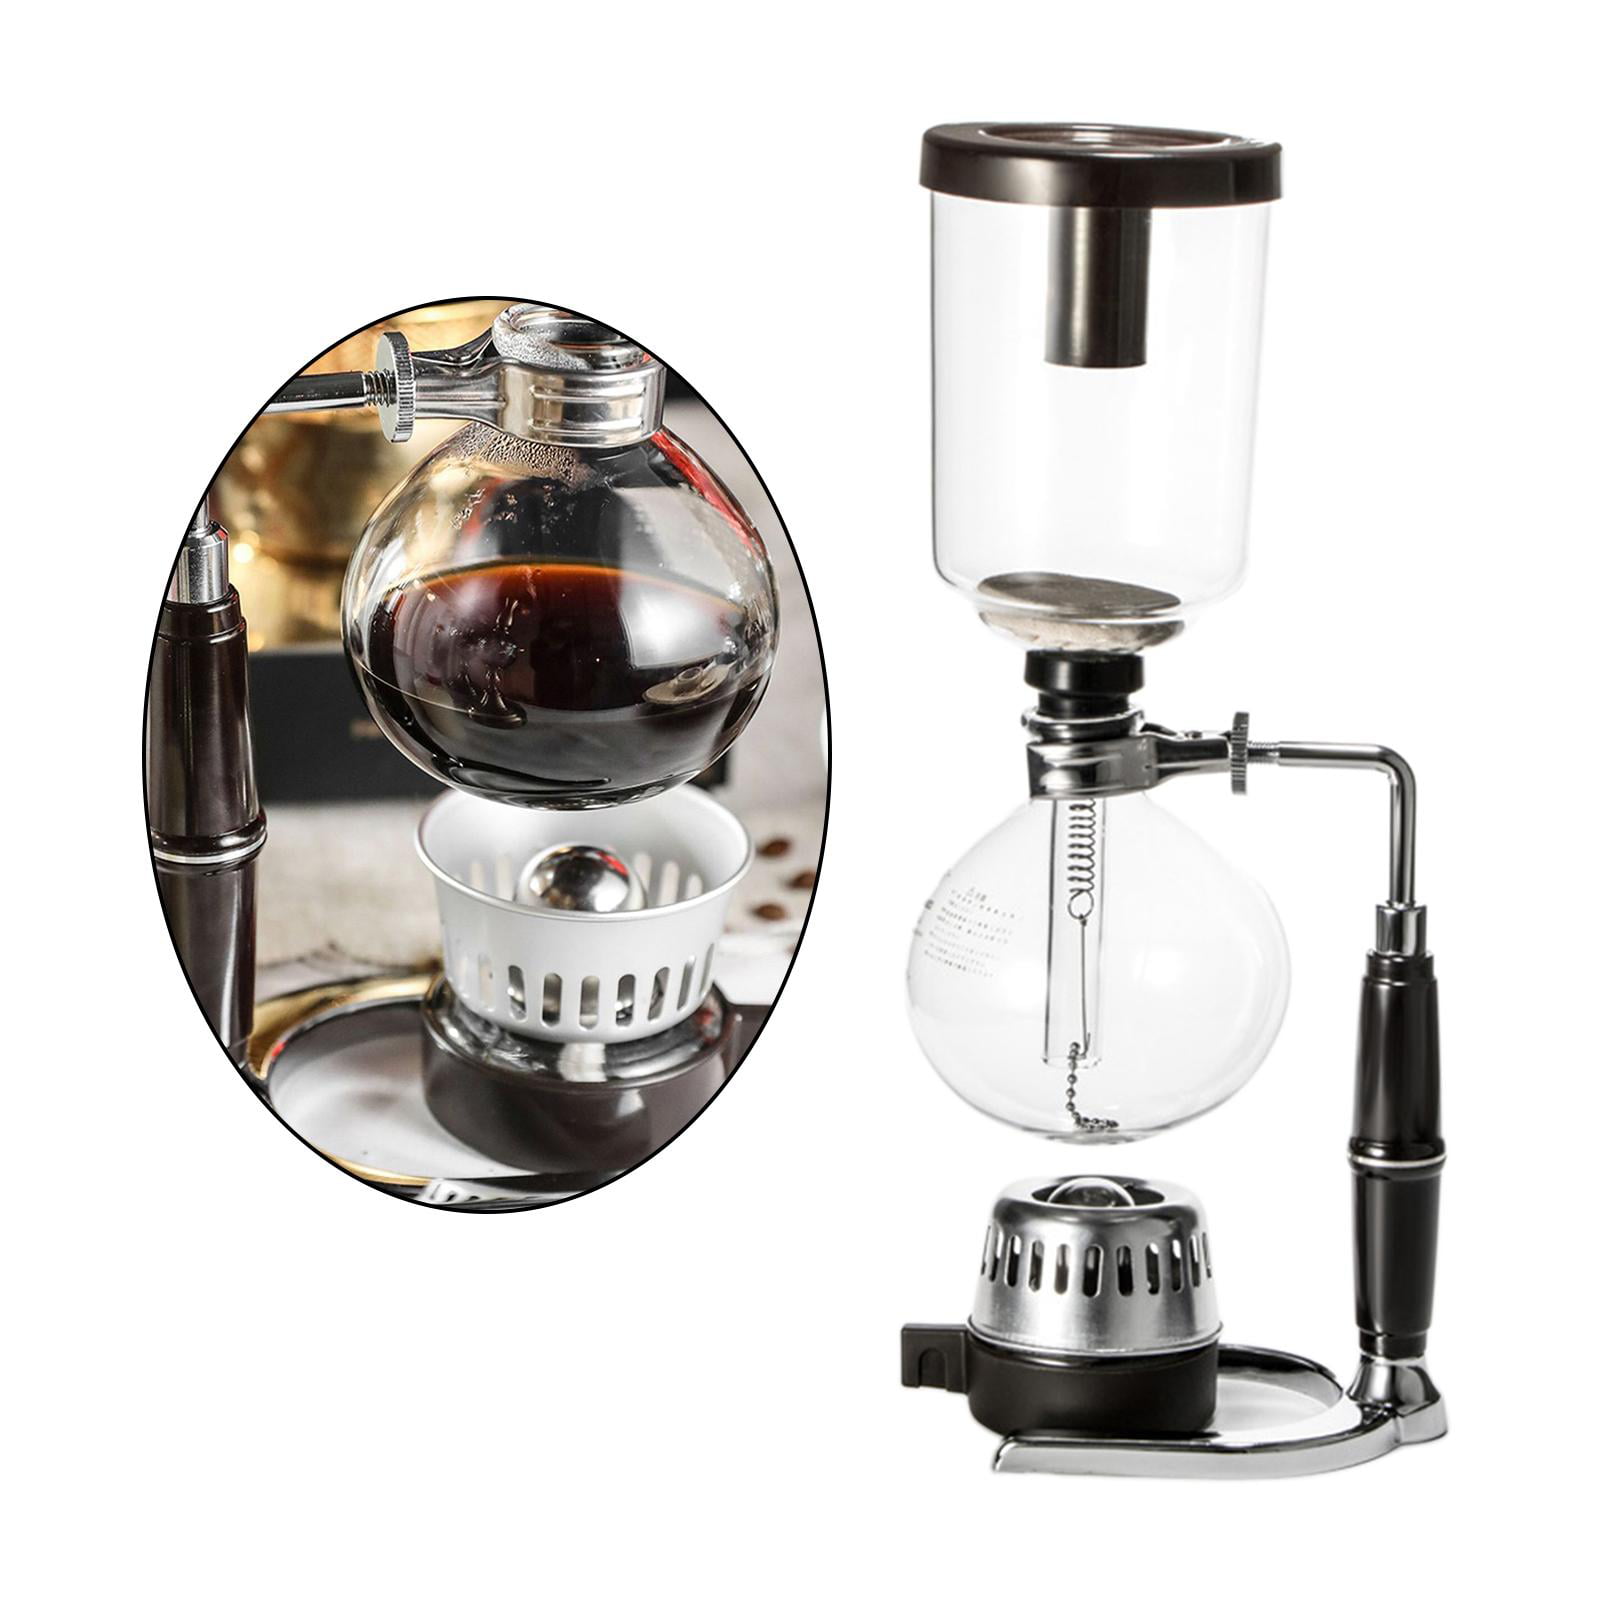  Japanese Style Siphon Coffee Maker Tea Siphon Pot Vacuum  Coffeemaker Glass Type Coffee Machine Filter Kahve Makinas 3cup 5cup  (3cup): Home & Kitchen